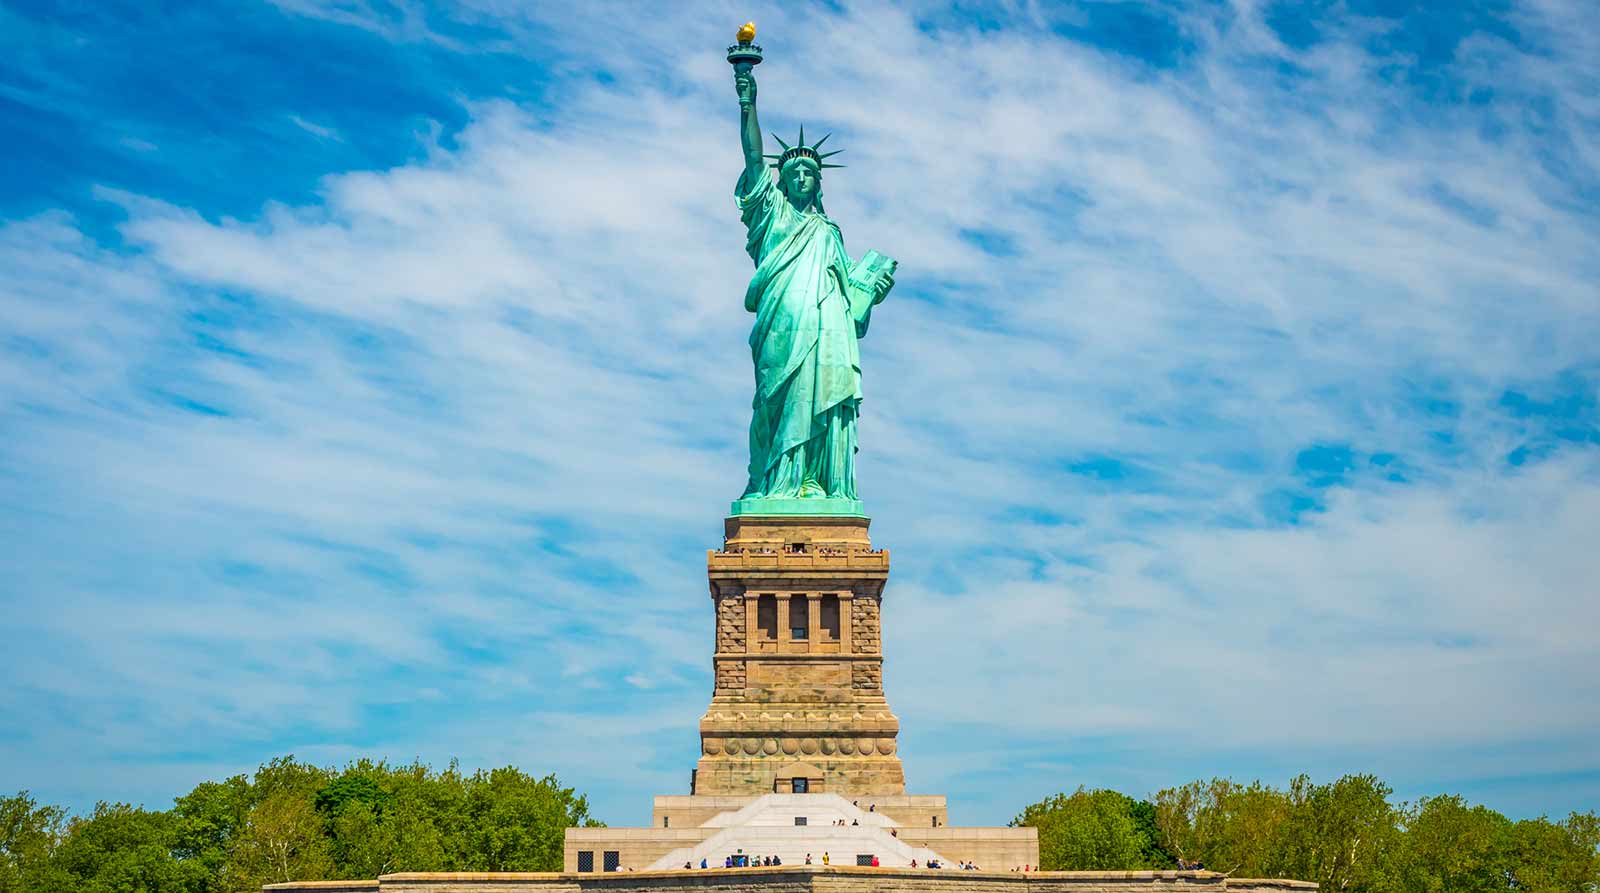 Statue-of-Liberty-National-Monument.jpg